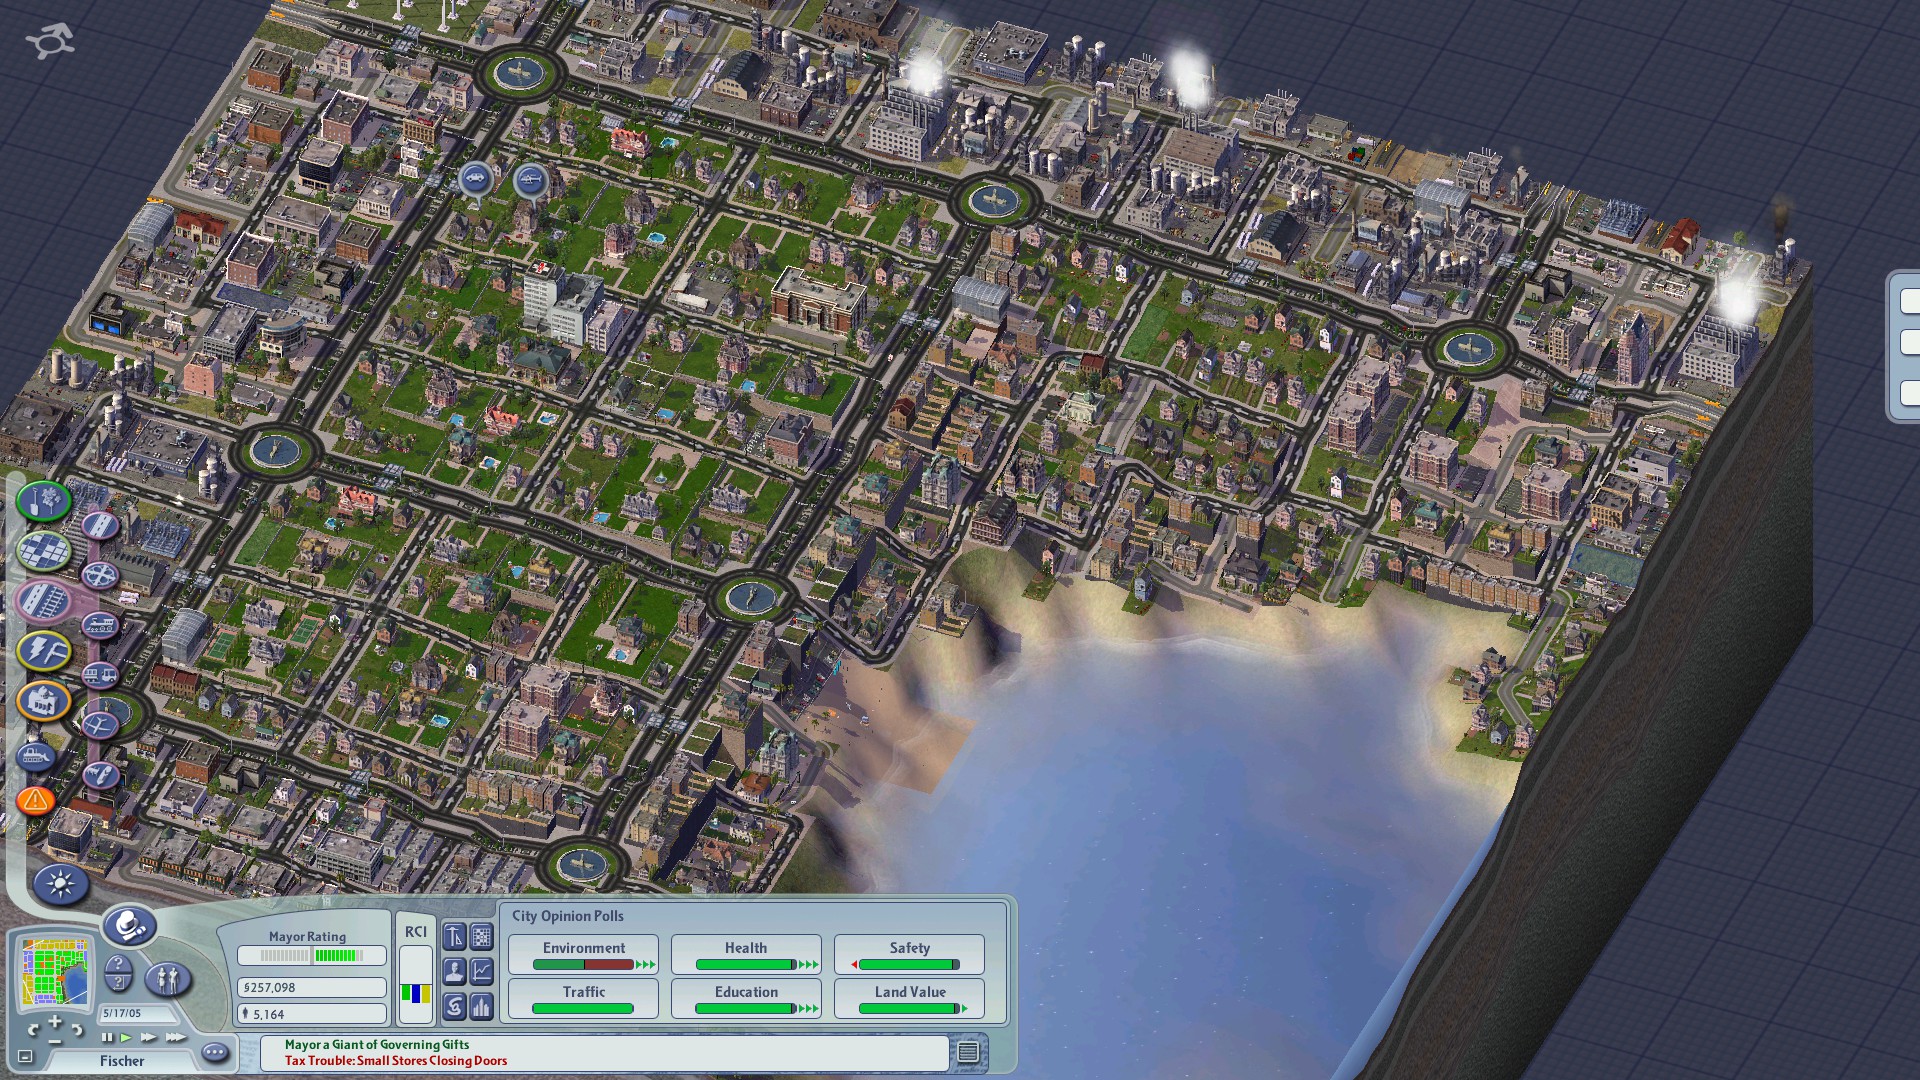 free simcity buildit layout template